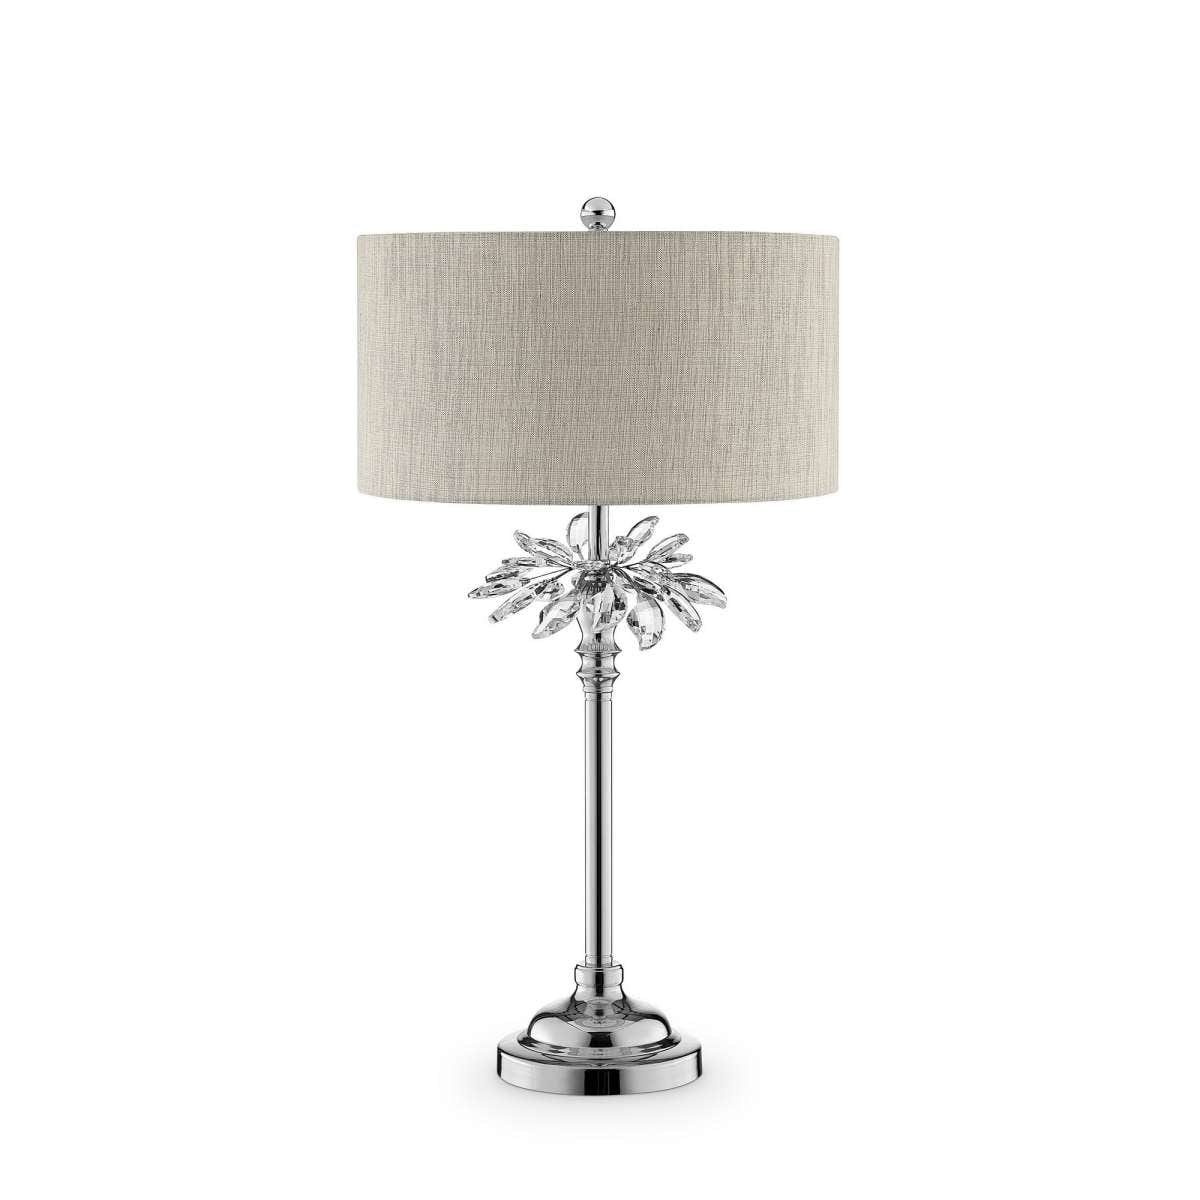 Benzara Table Lamp With Starburst Crystal Accent, Gray And Silver By Benzara Table Lamps BM240451